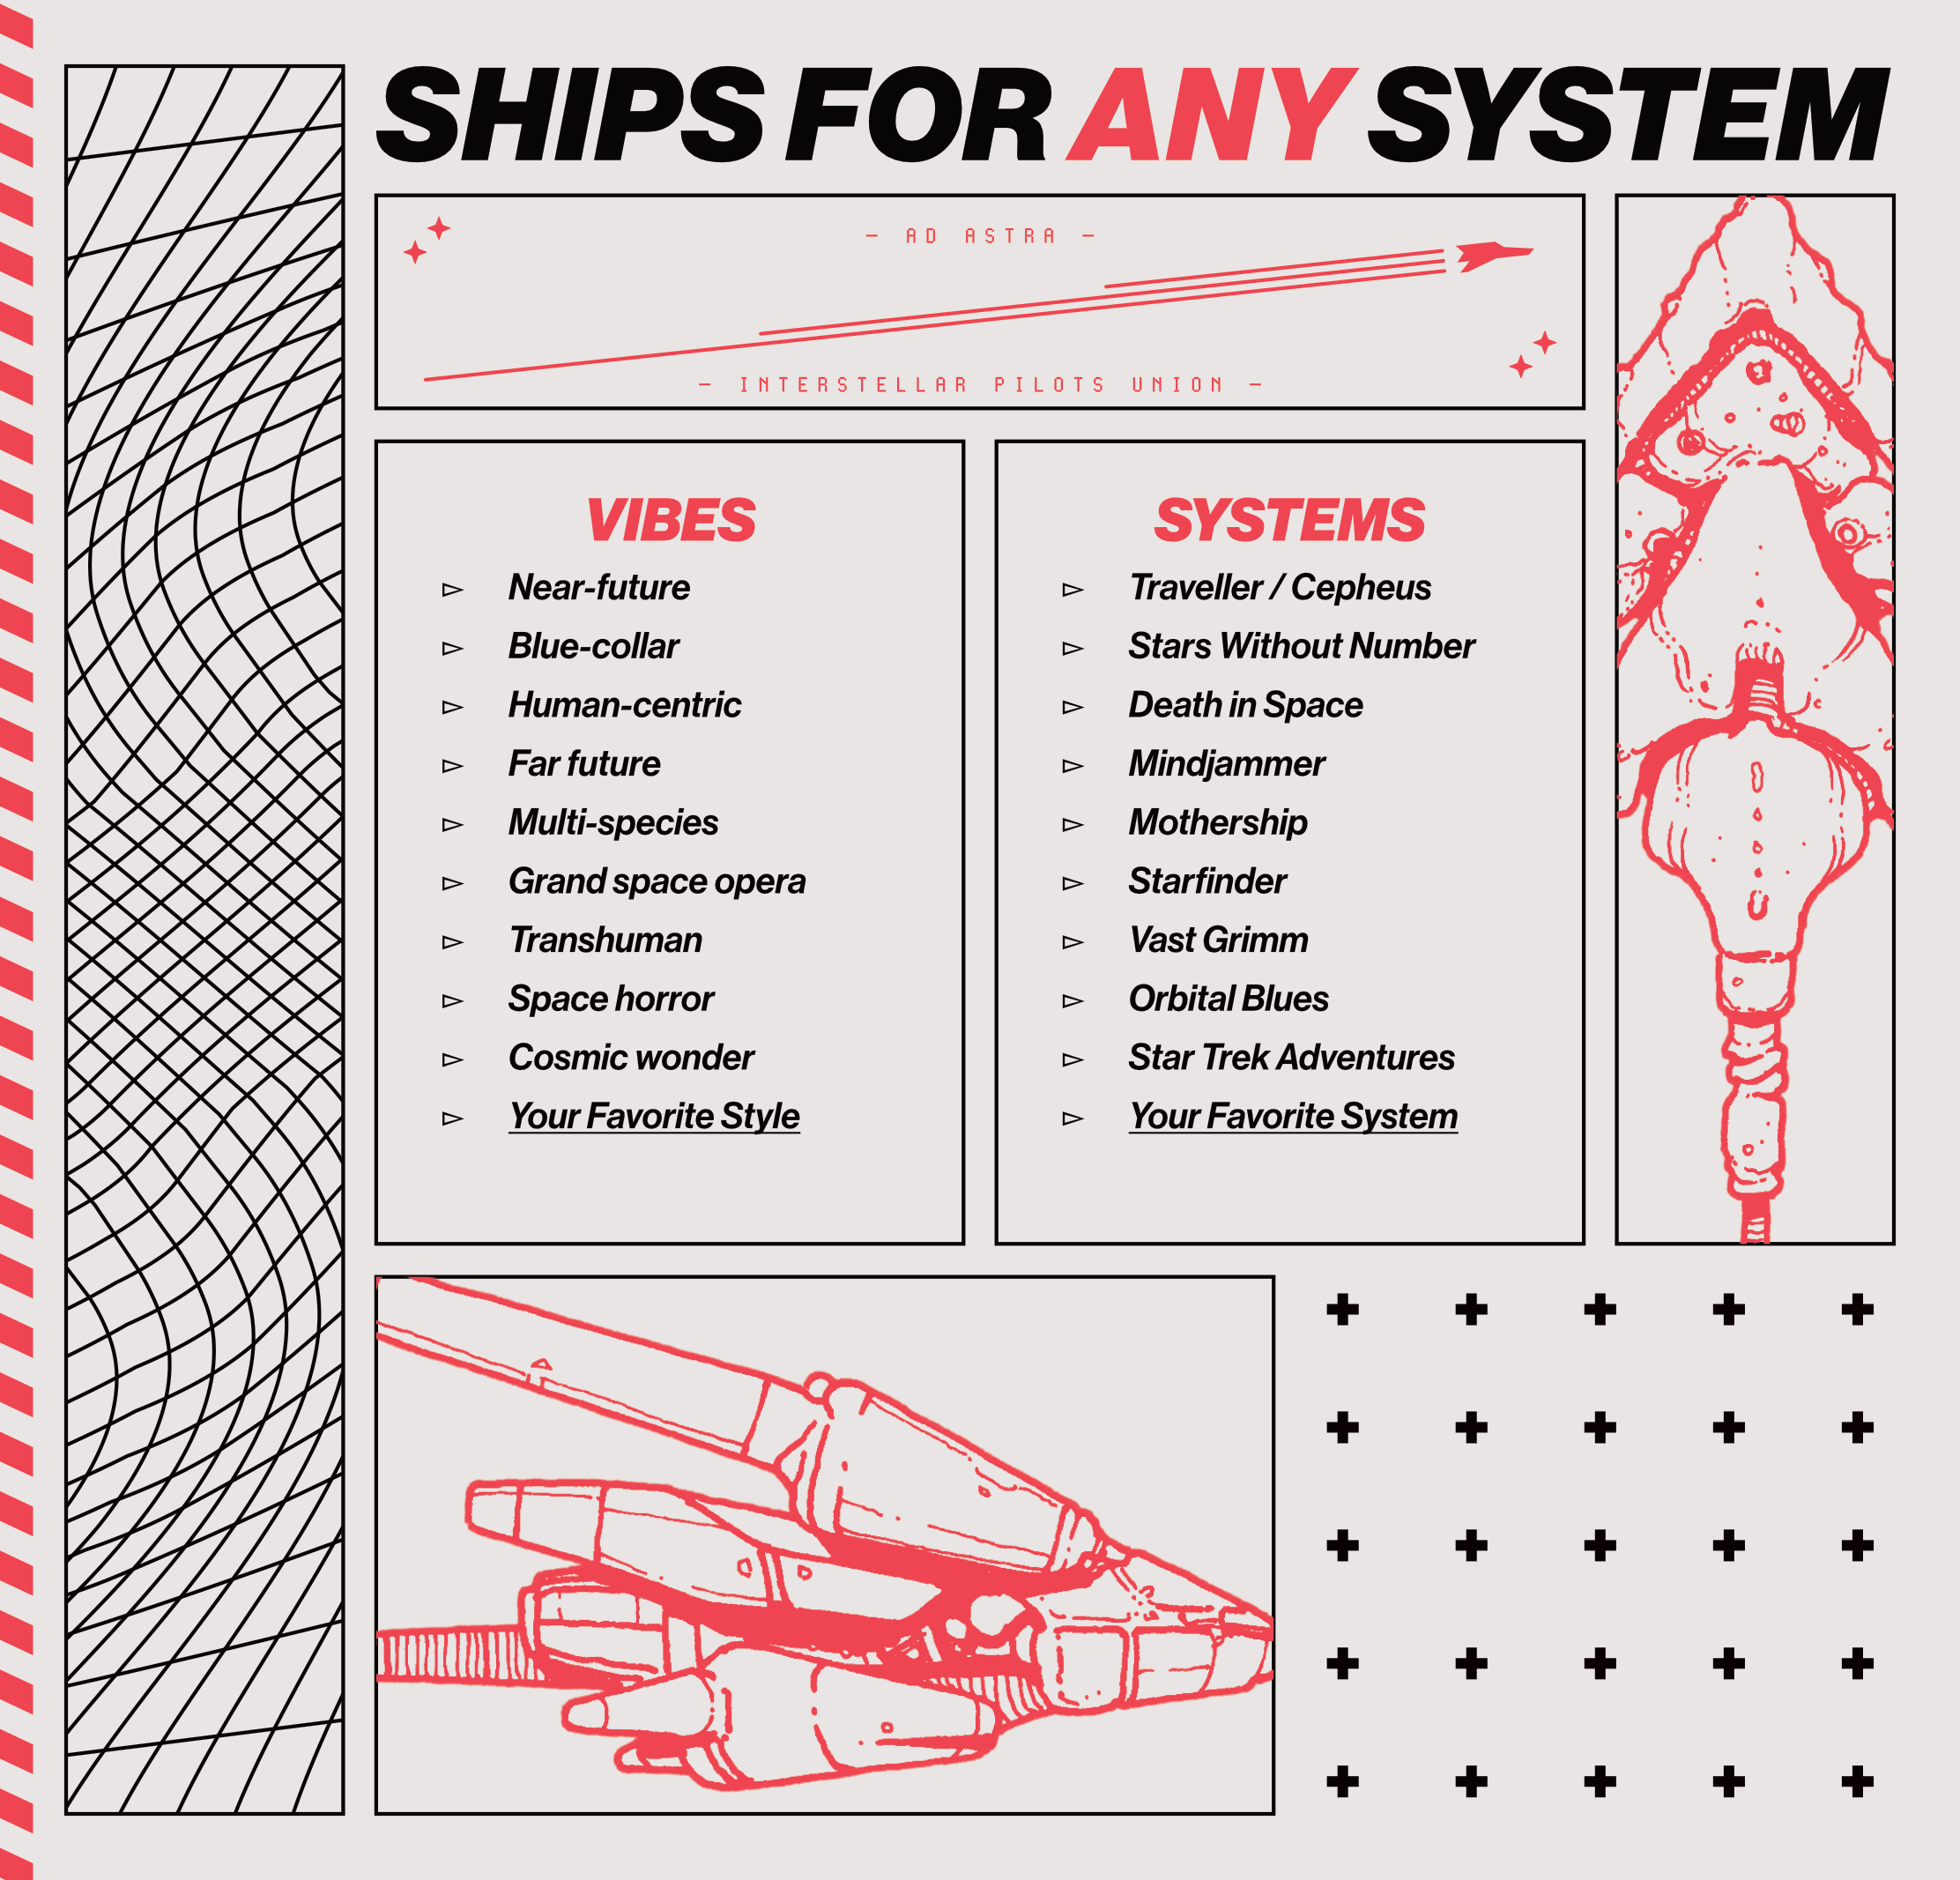 Kickstarter_Graphic_Assets_-_An_Infinity_of_Ships_-_Ships_for_Any_System_v2